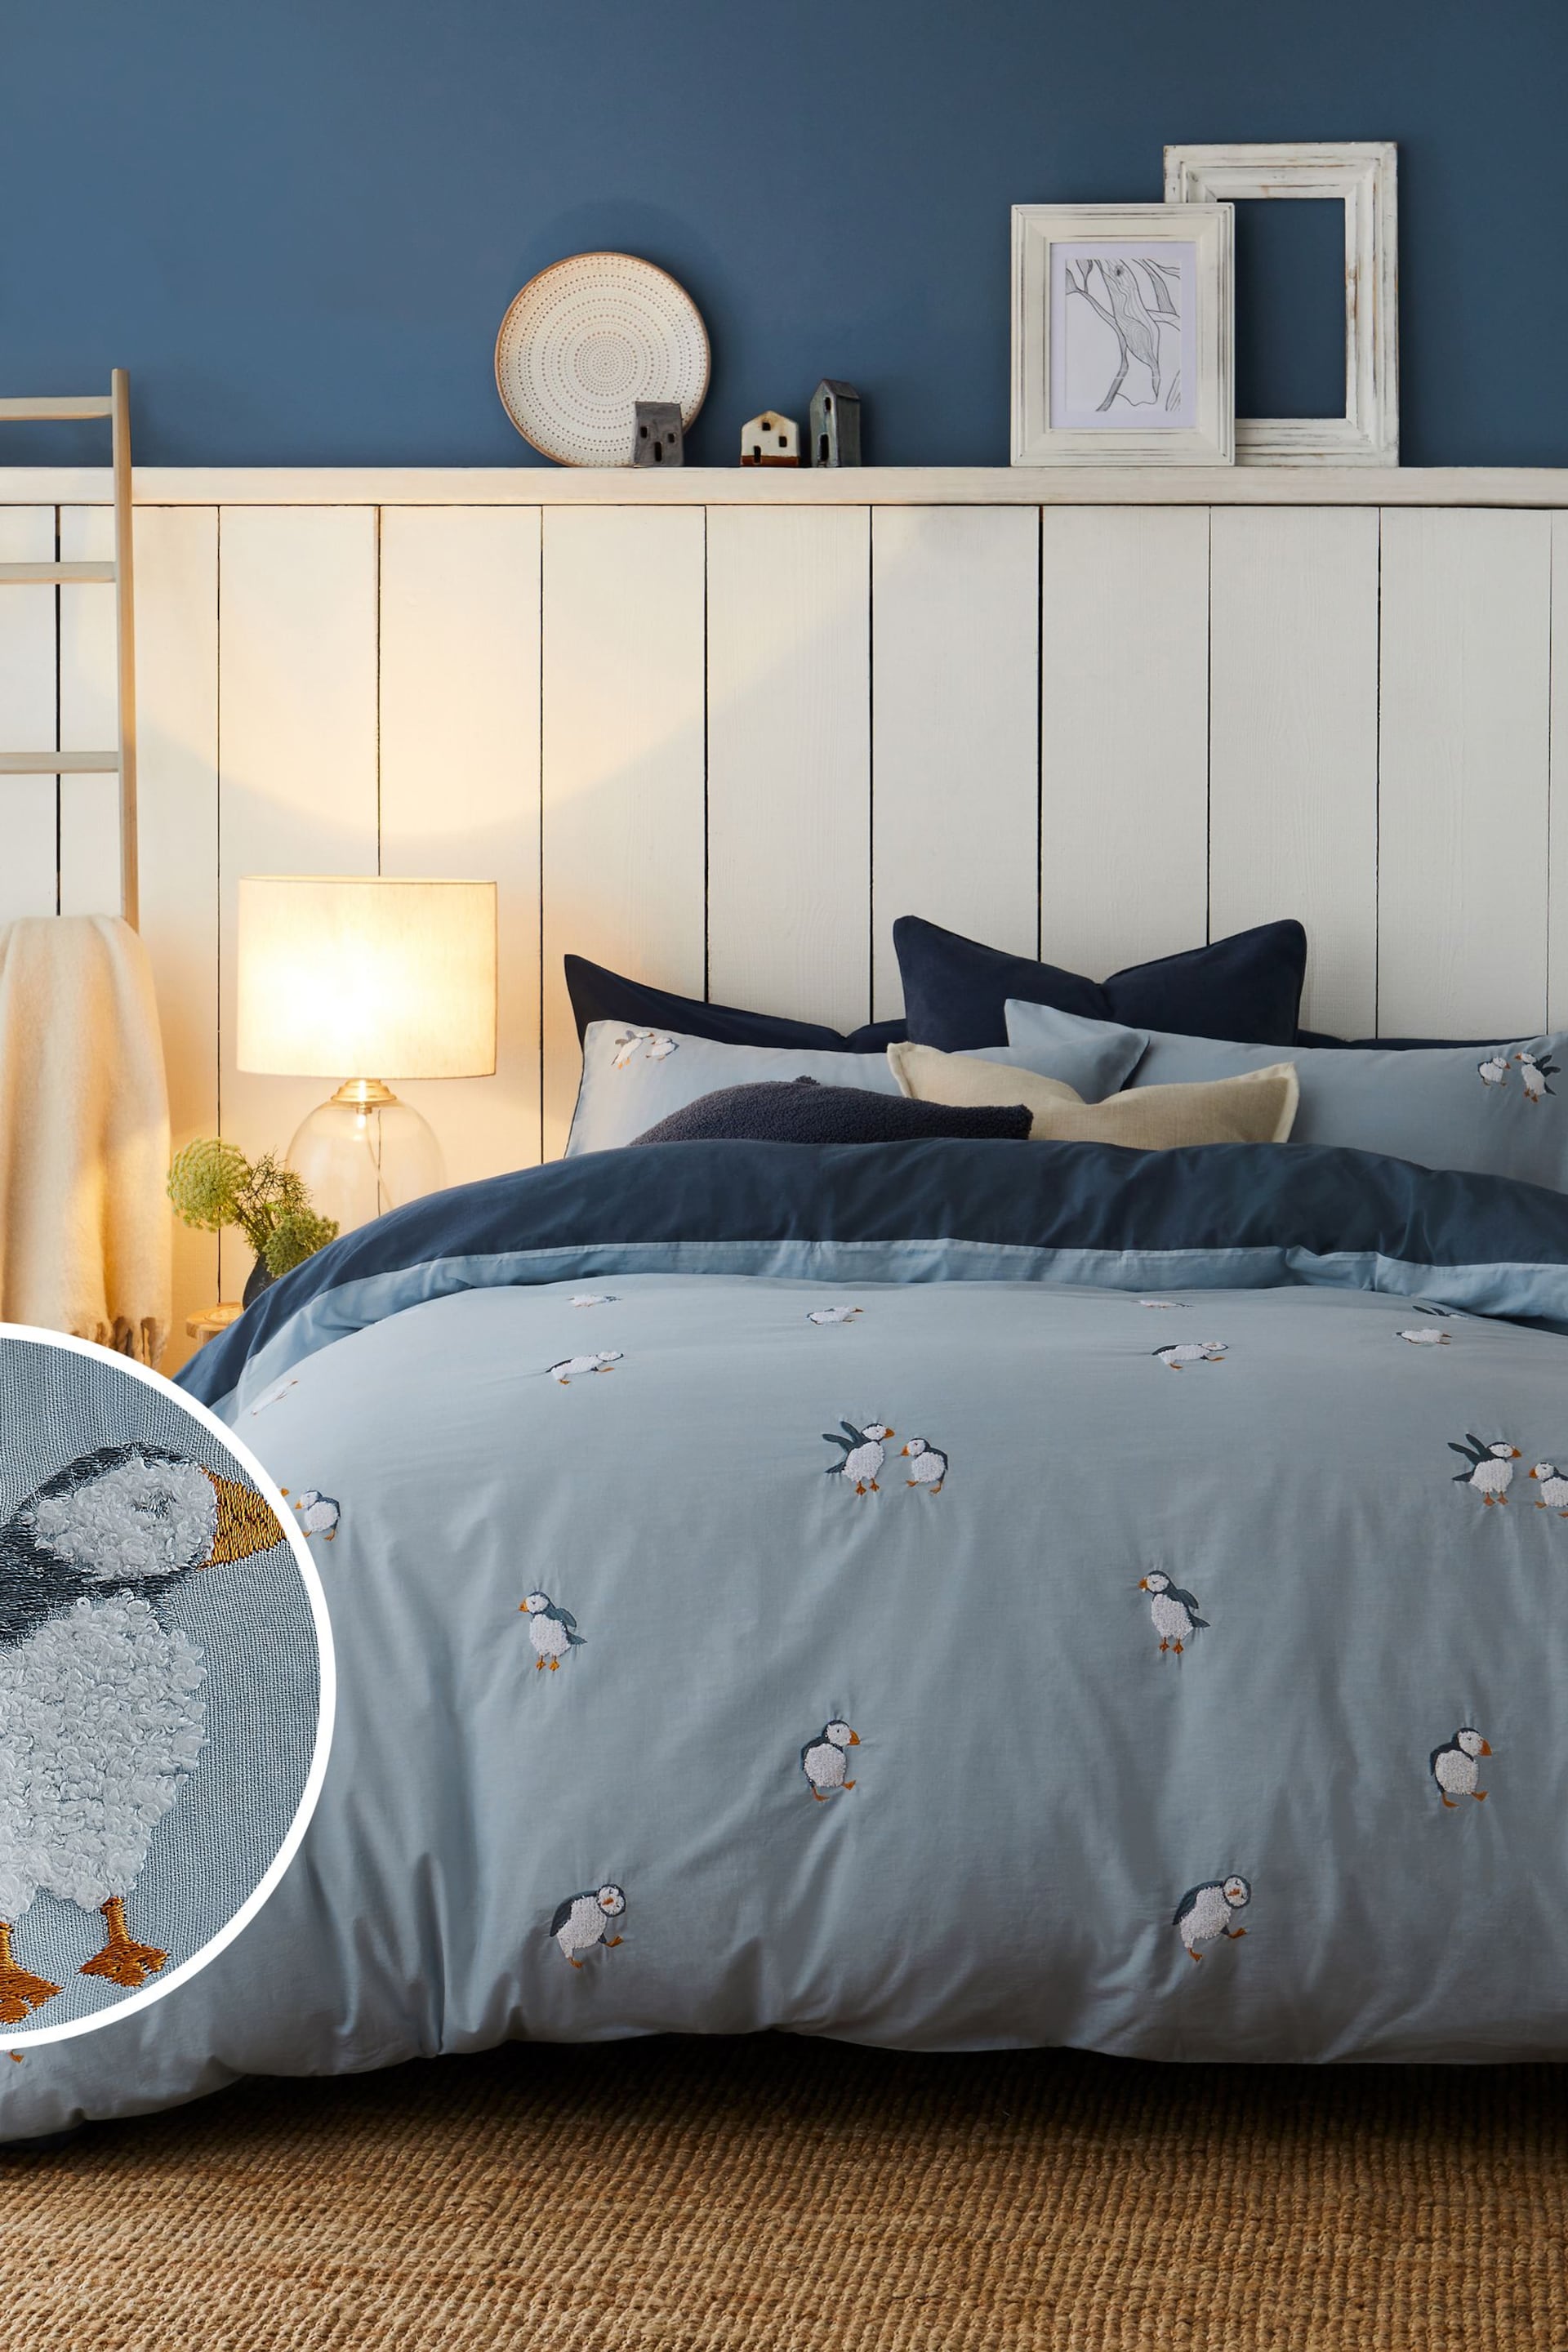 Blue Tufted Puffin Duvet Cover and Pillowcase Set - Image 1 of 5